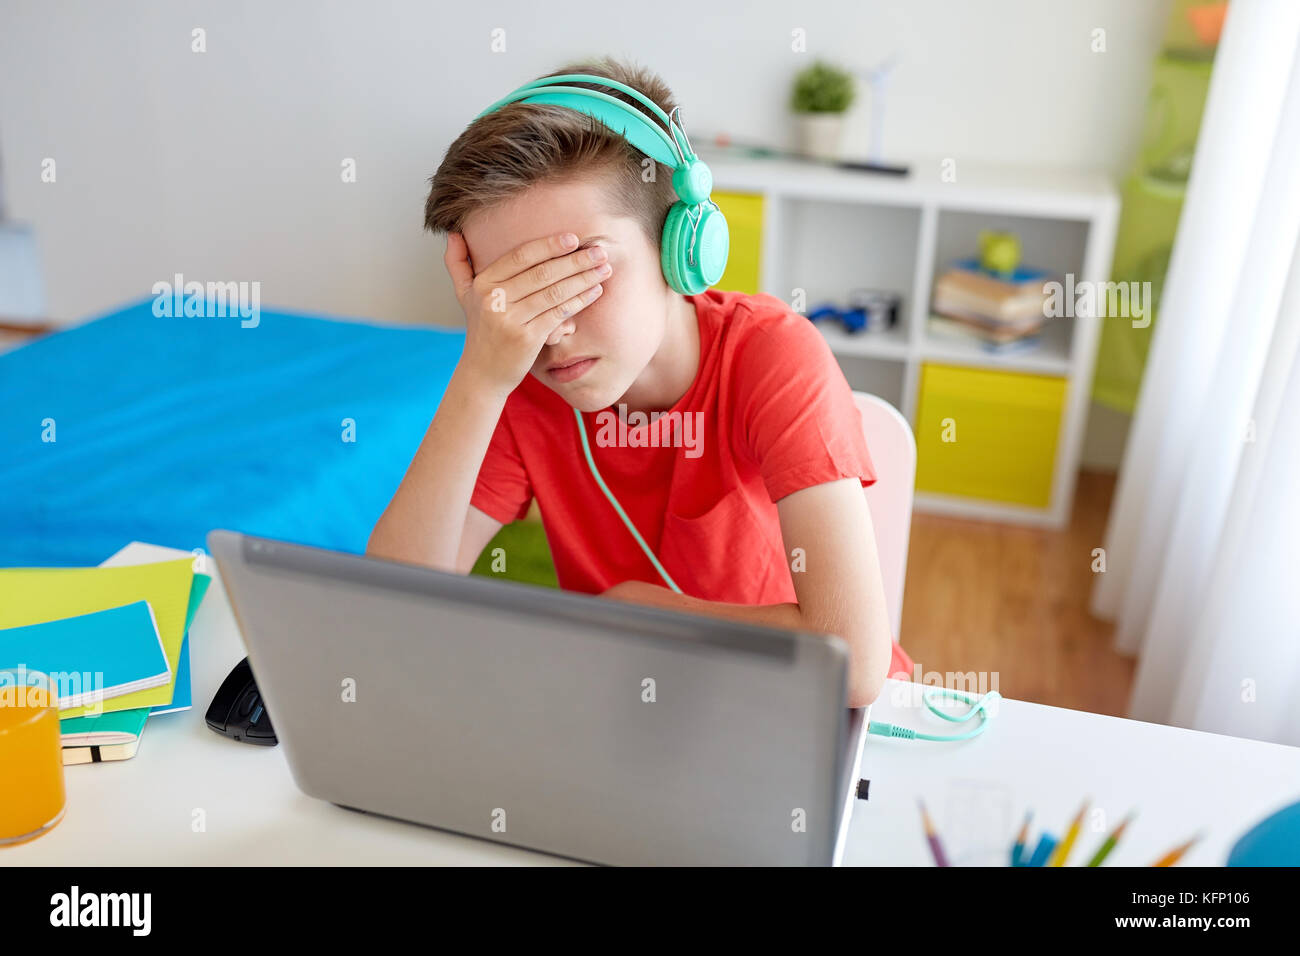 boy in headphones playing video game on laptop Stock Photo